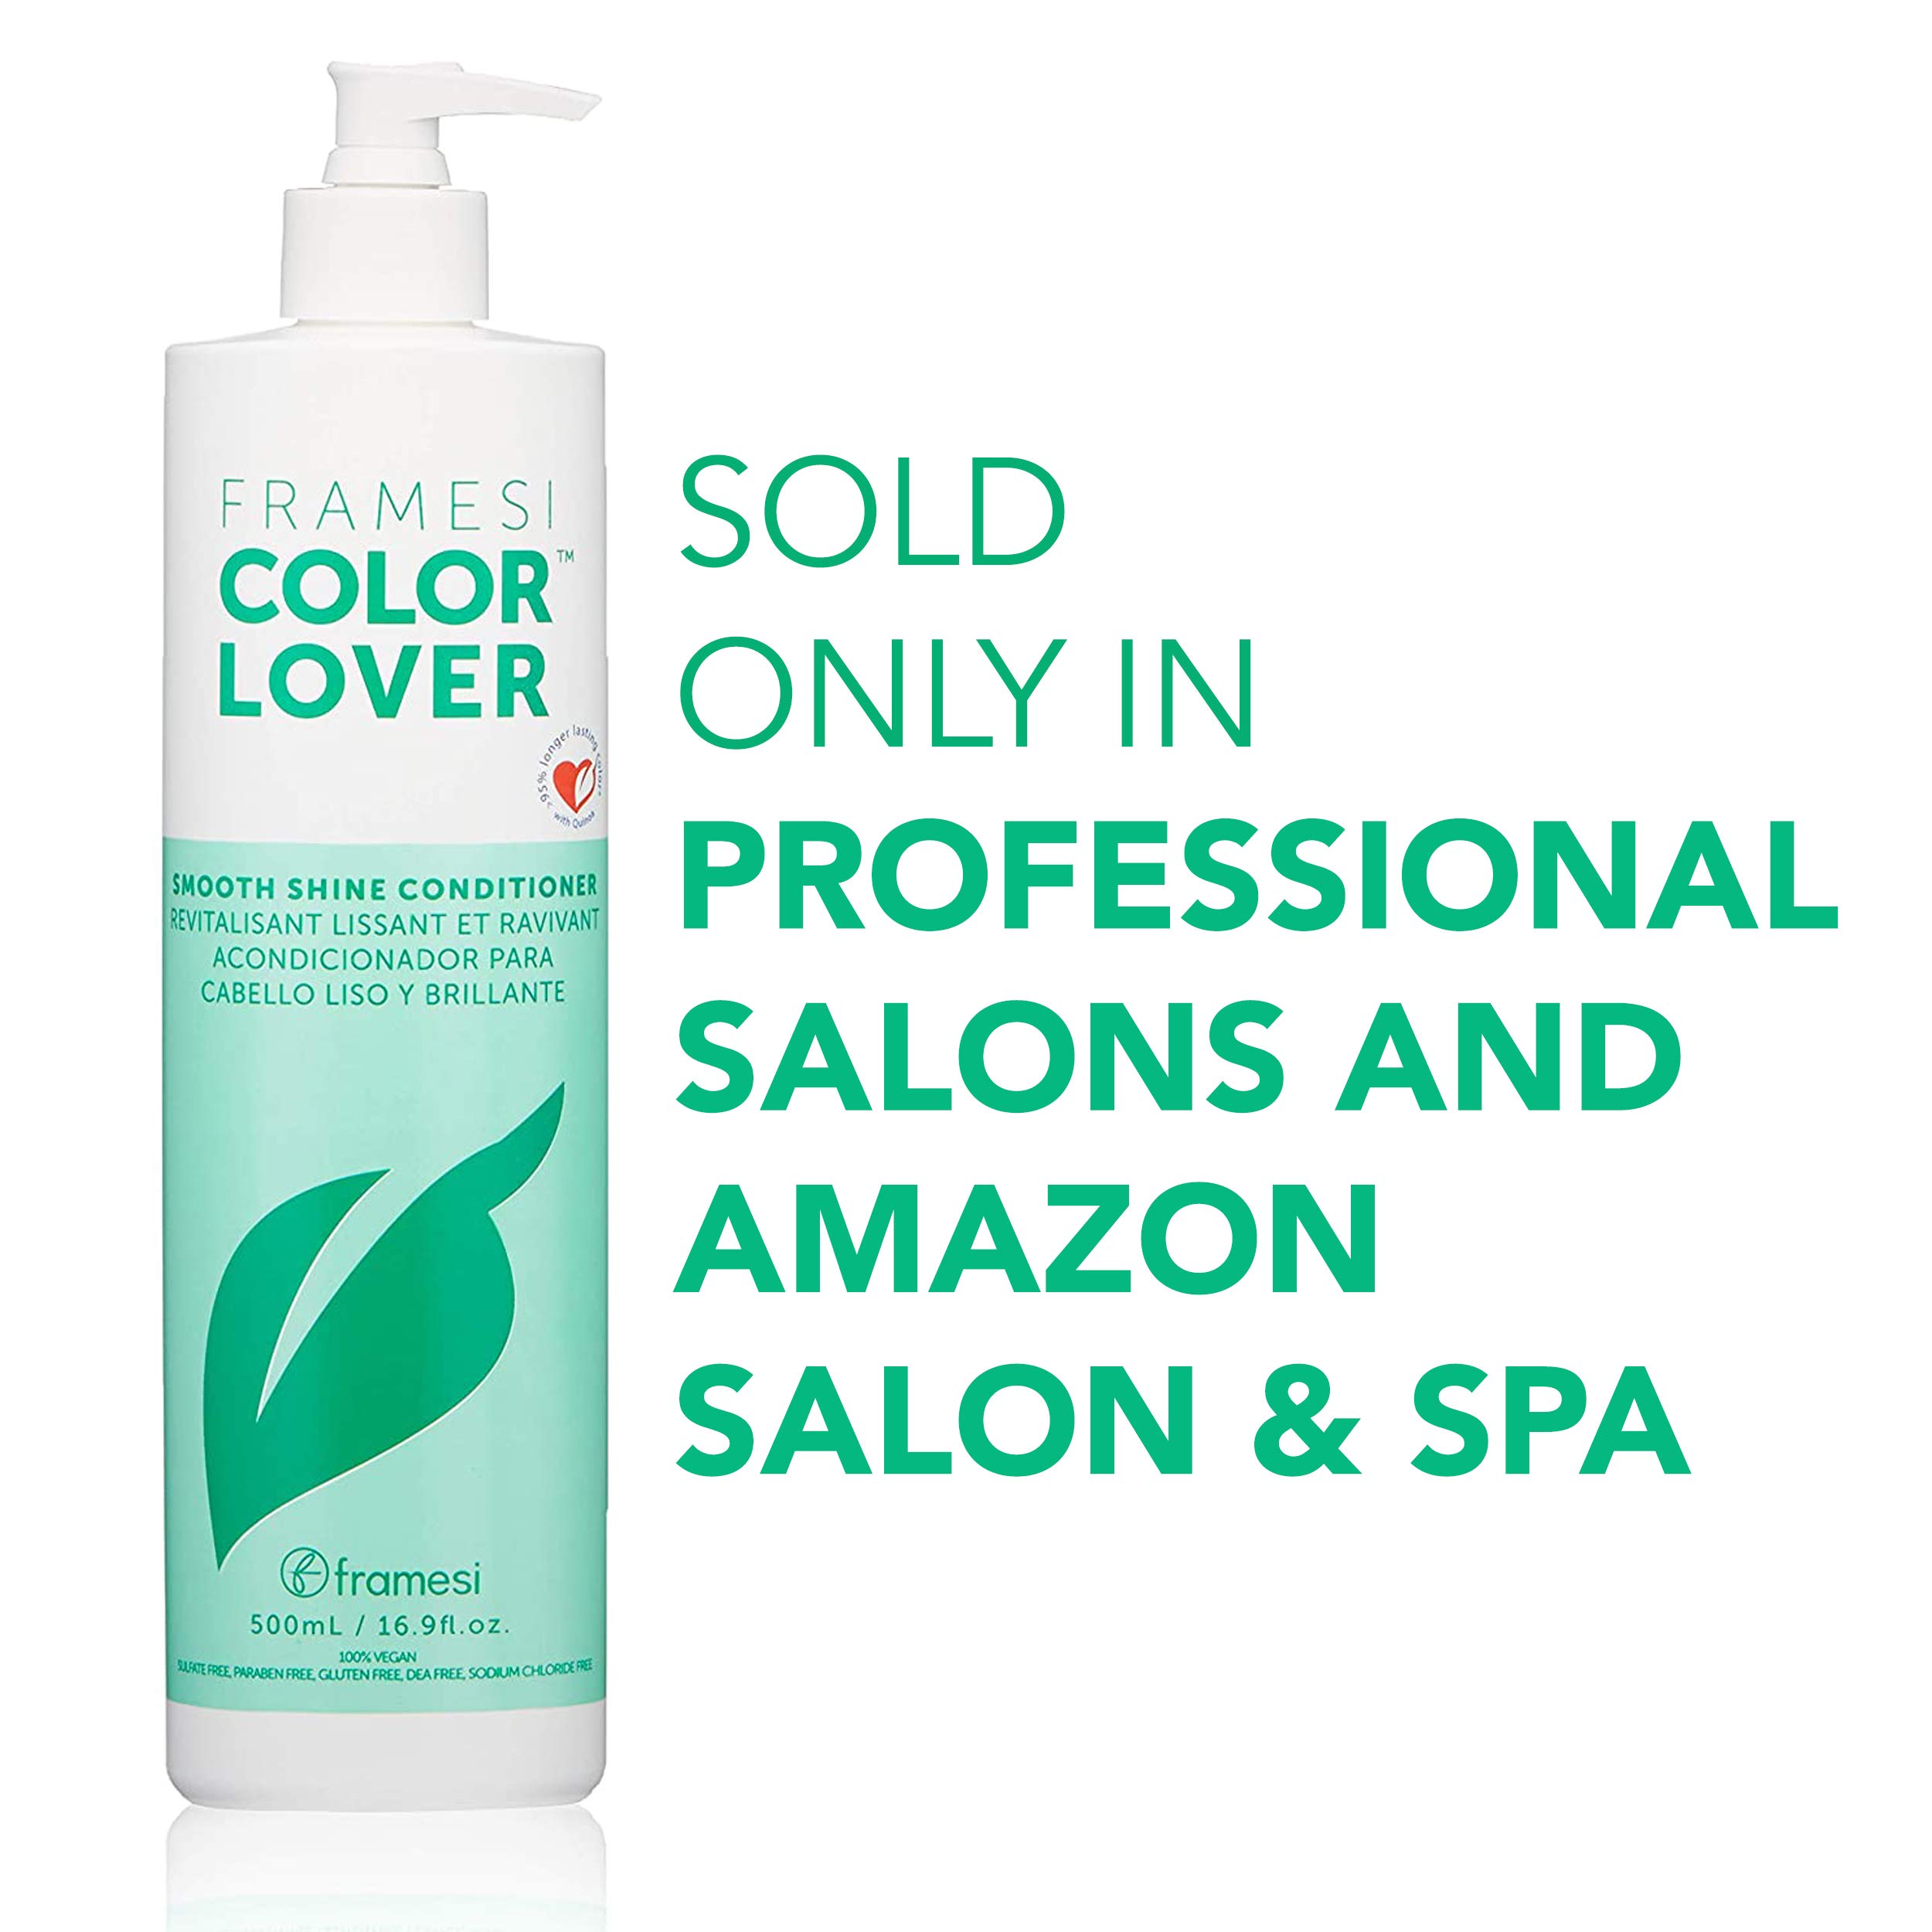 Framesi Color Lover Smooth Shine Conditioner, Sulfate Free Conditioner with Coconut Oil and Quinoa, Color Treated Hair